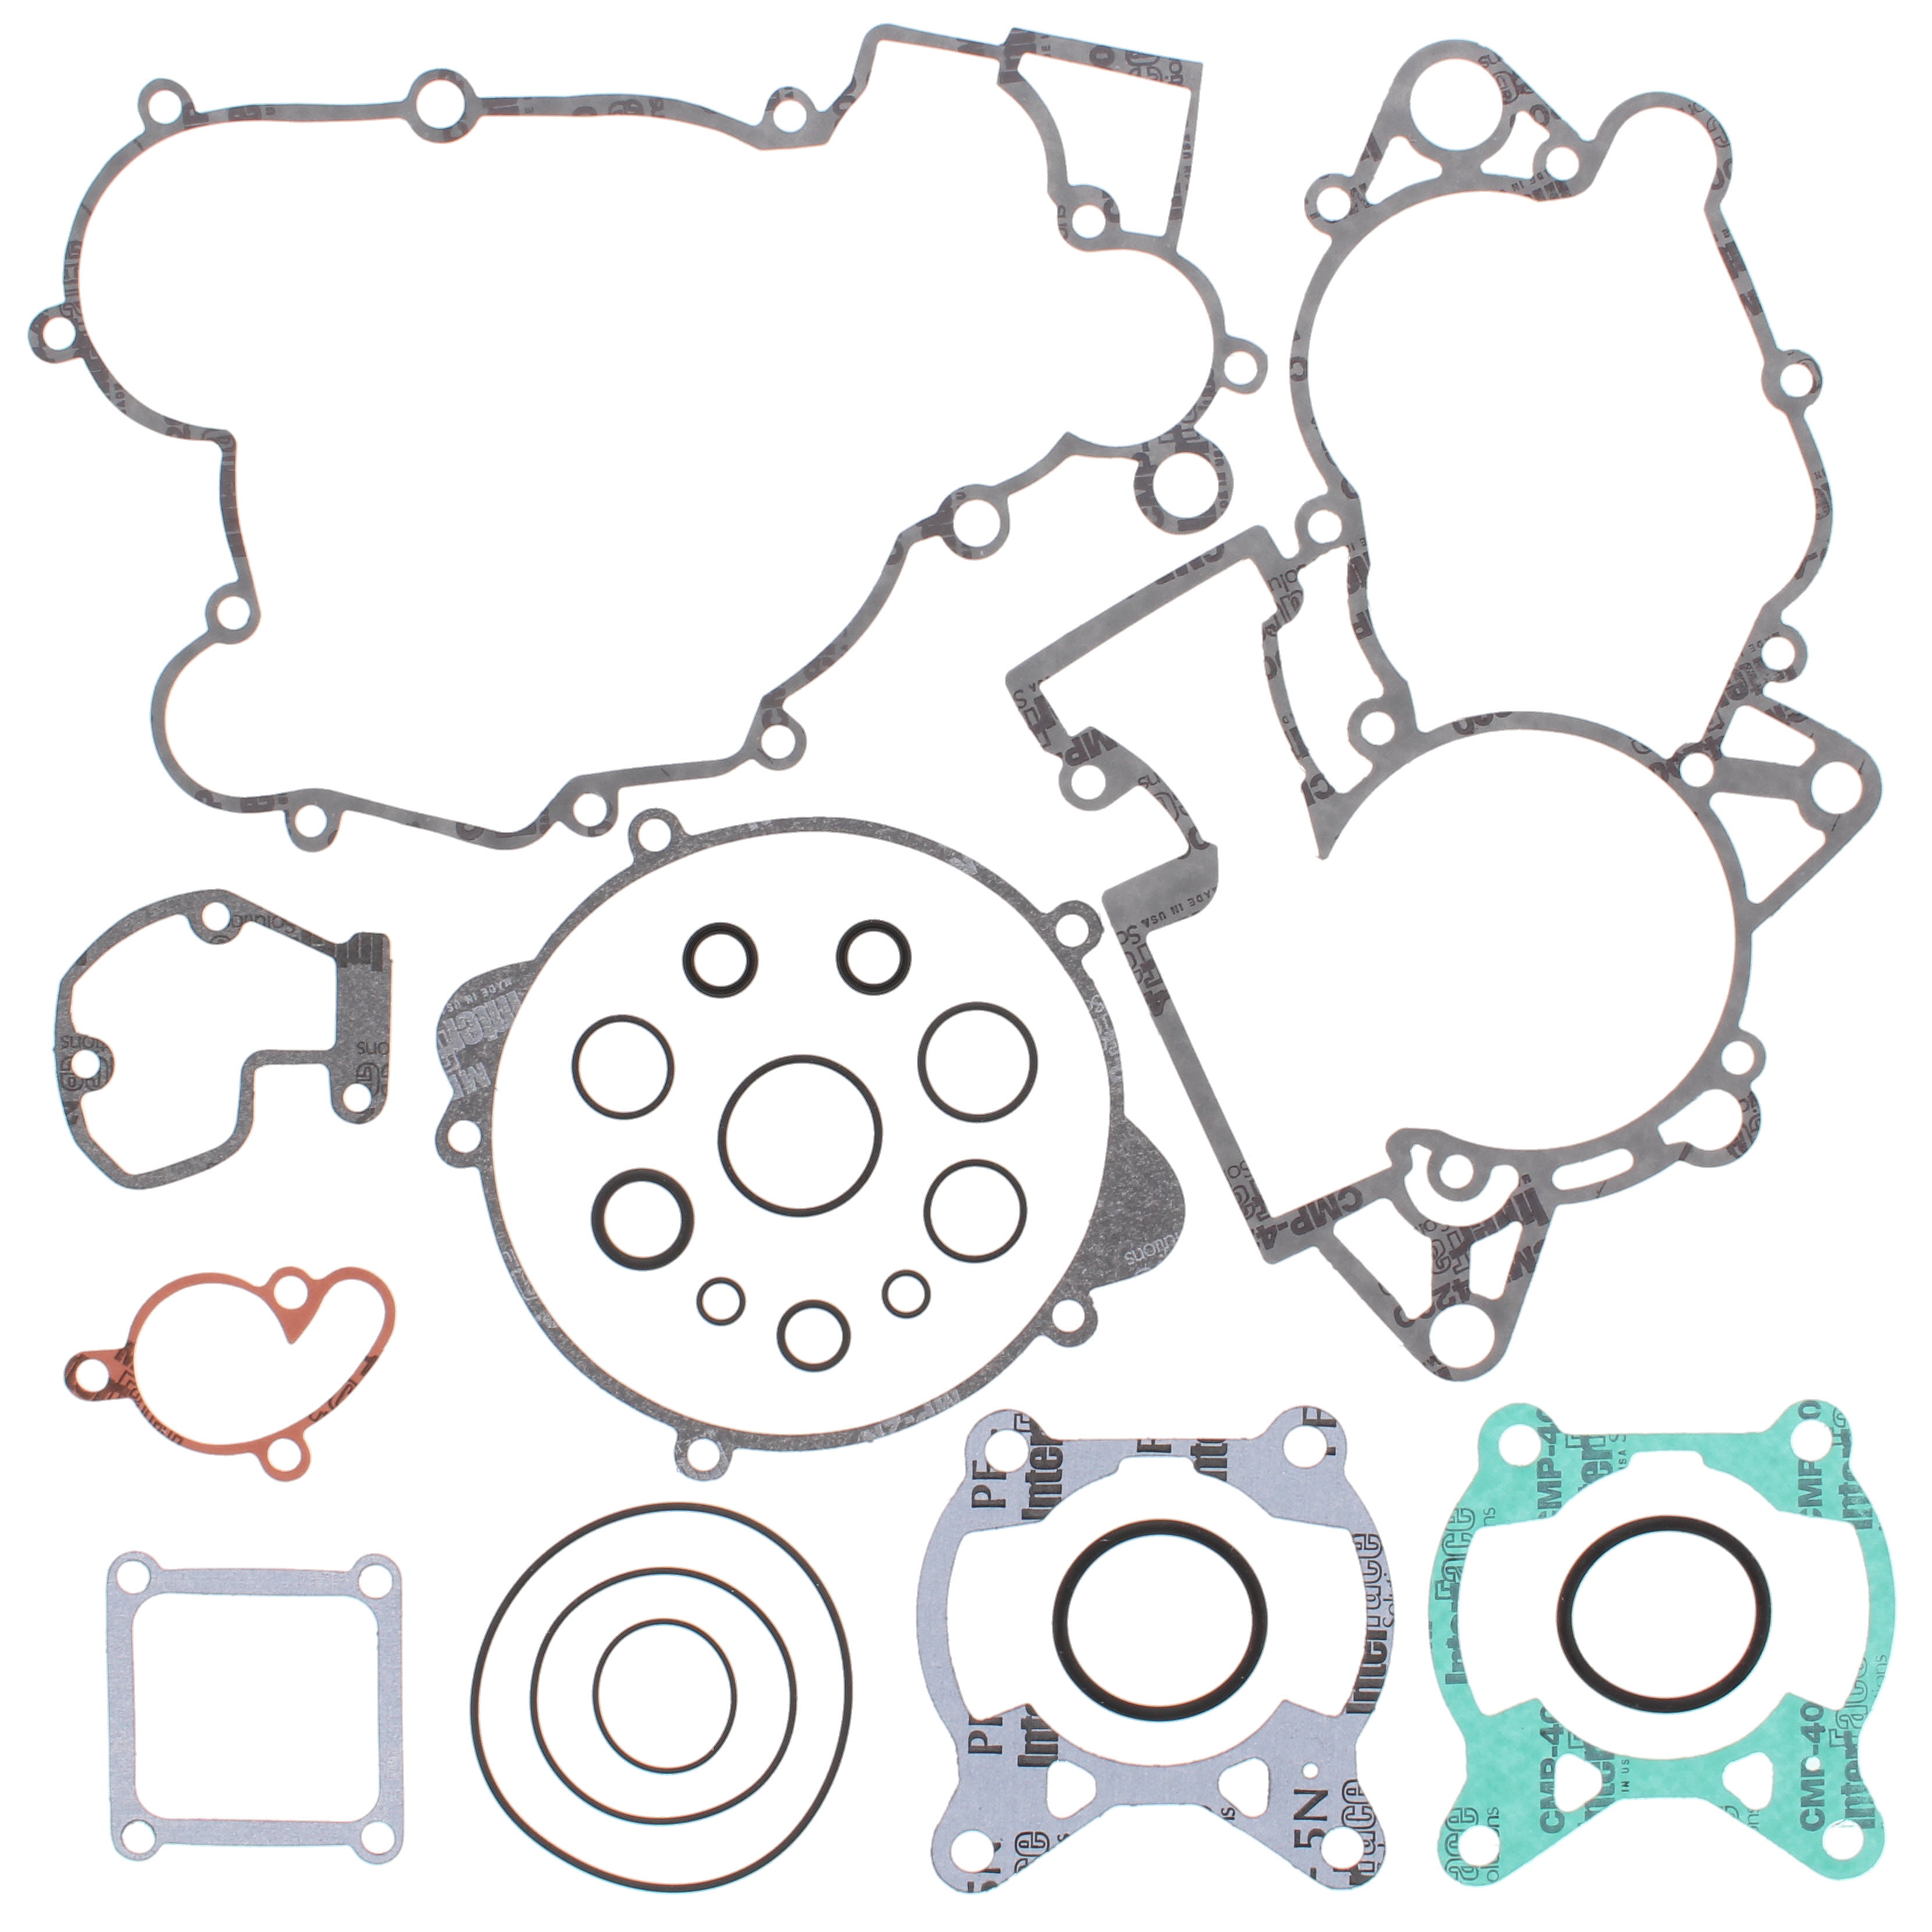 Exhaust Gasket Kit For KTM SX 85 2013-2017